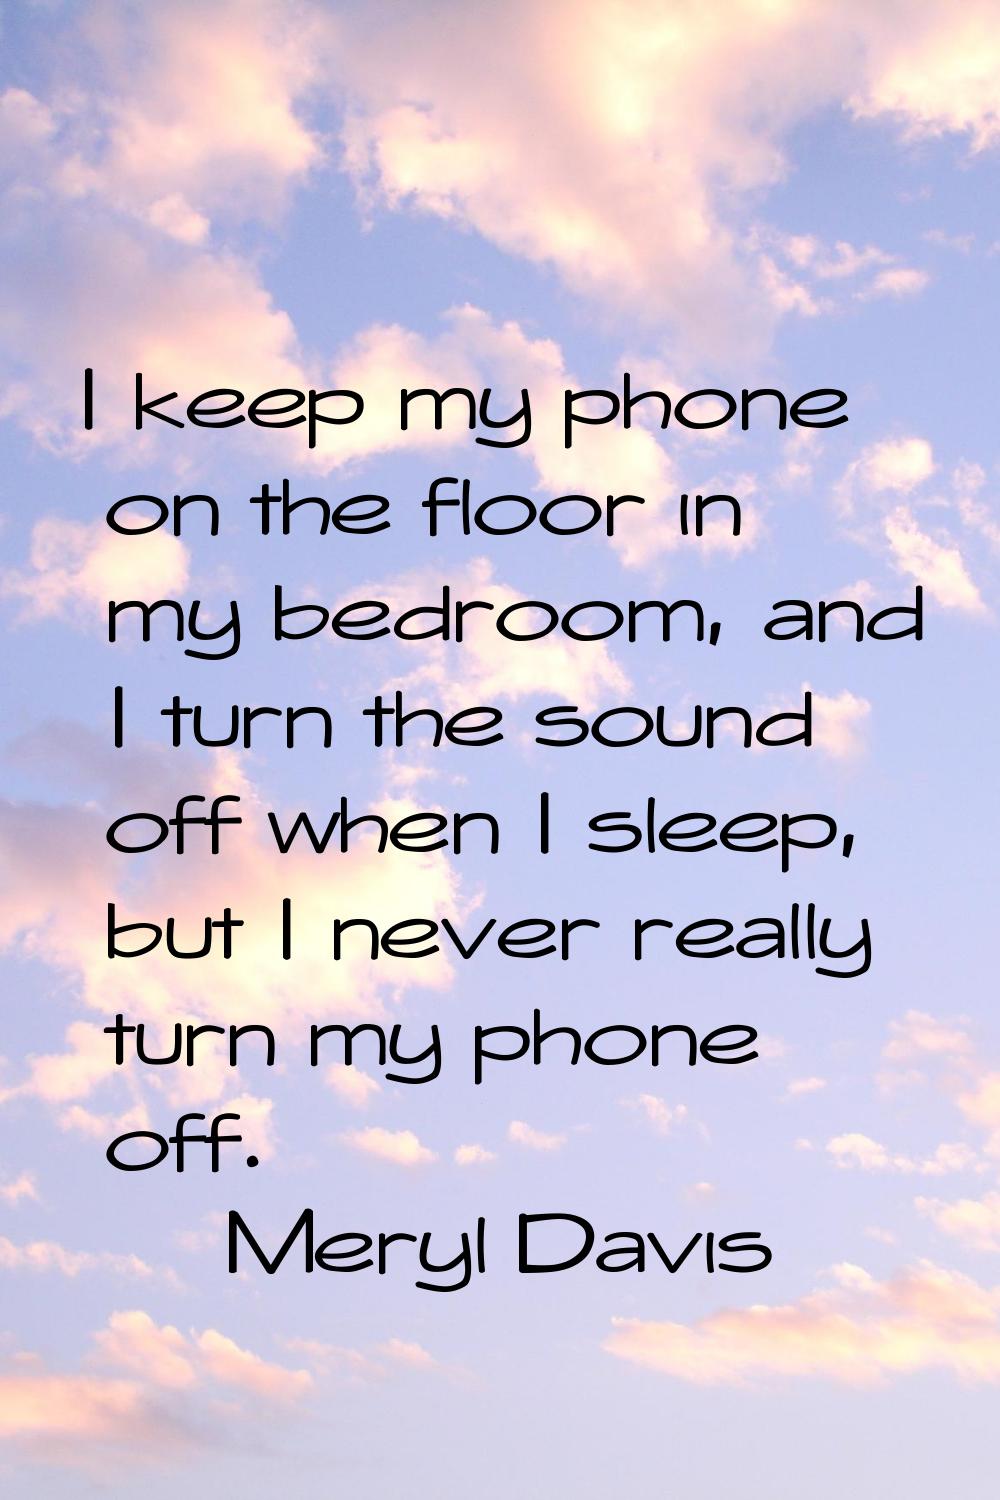 I keep my phone on the floor in my bedroom, and I turn the sound off when I sleep, but I never real